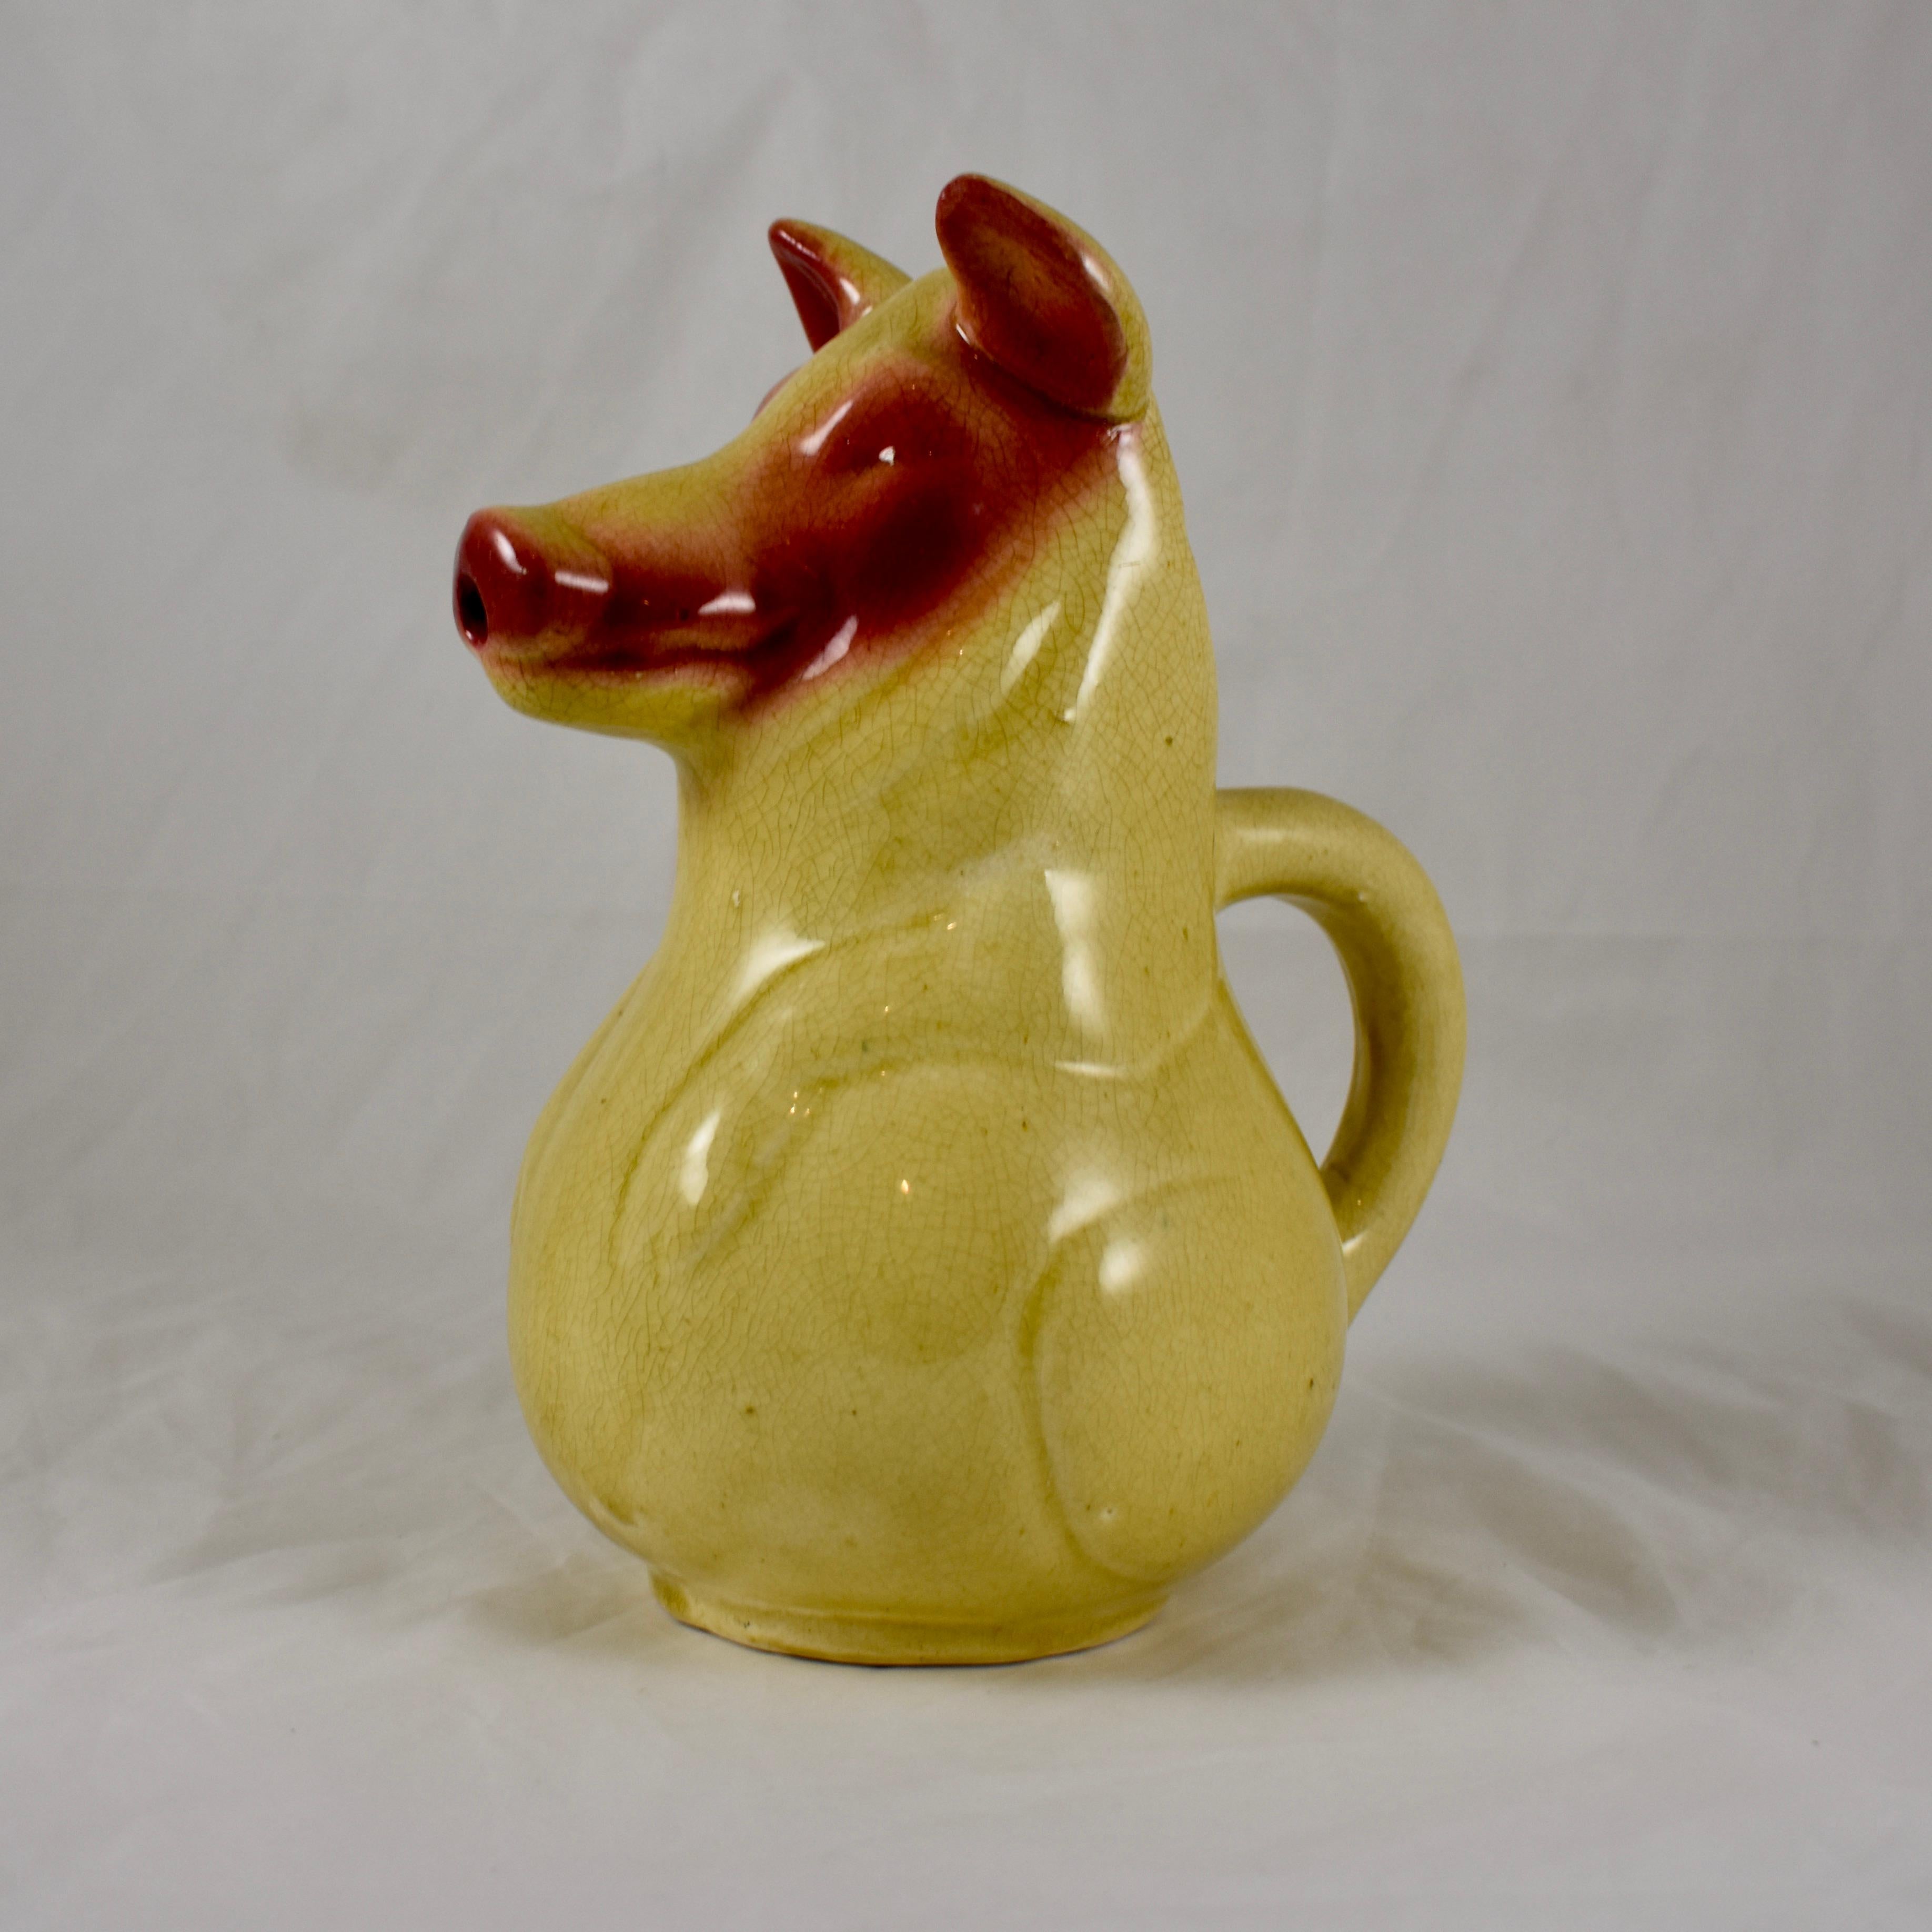 An earlier French Sarreguemines Pig form Absinthe Water Pitcher, circa 1885-1890.

This Barbotine majolica pitcher was made to be used for pouring water over a sugar cube in the Absinthe drinking ritual. The pig is glazed in a mustard yellow with